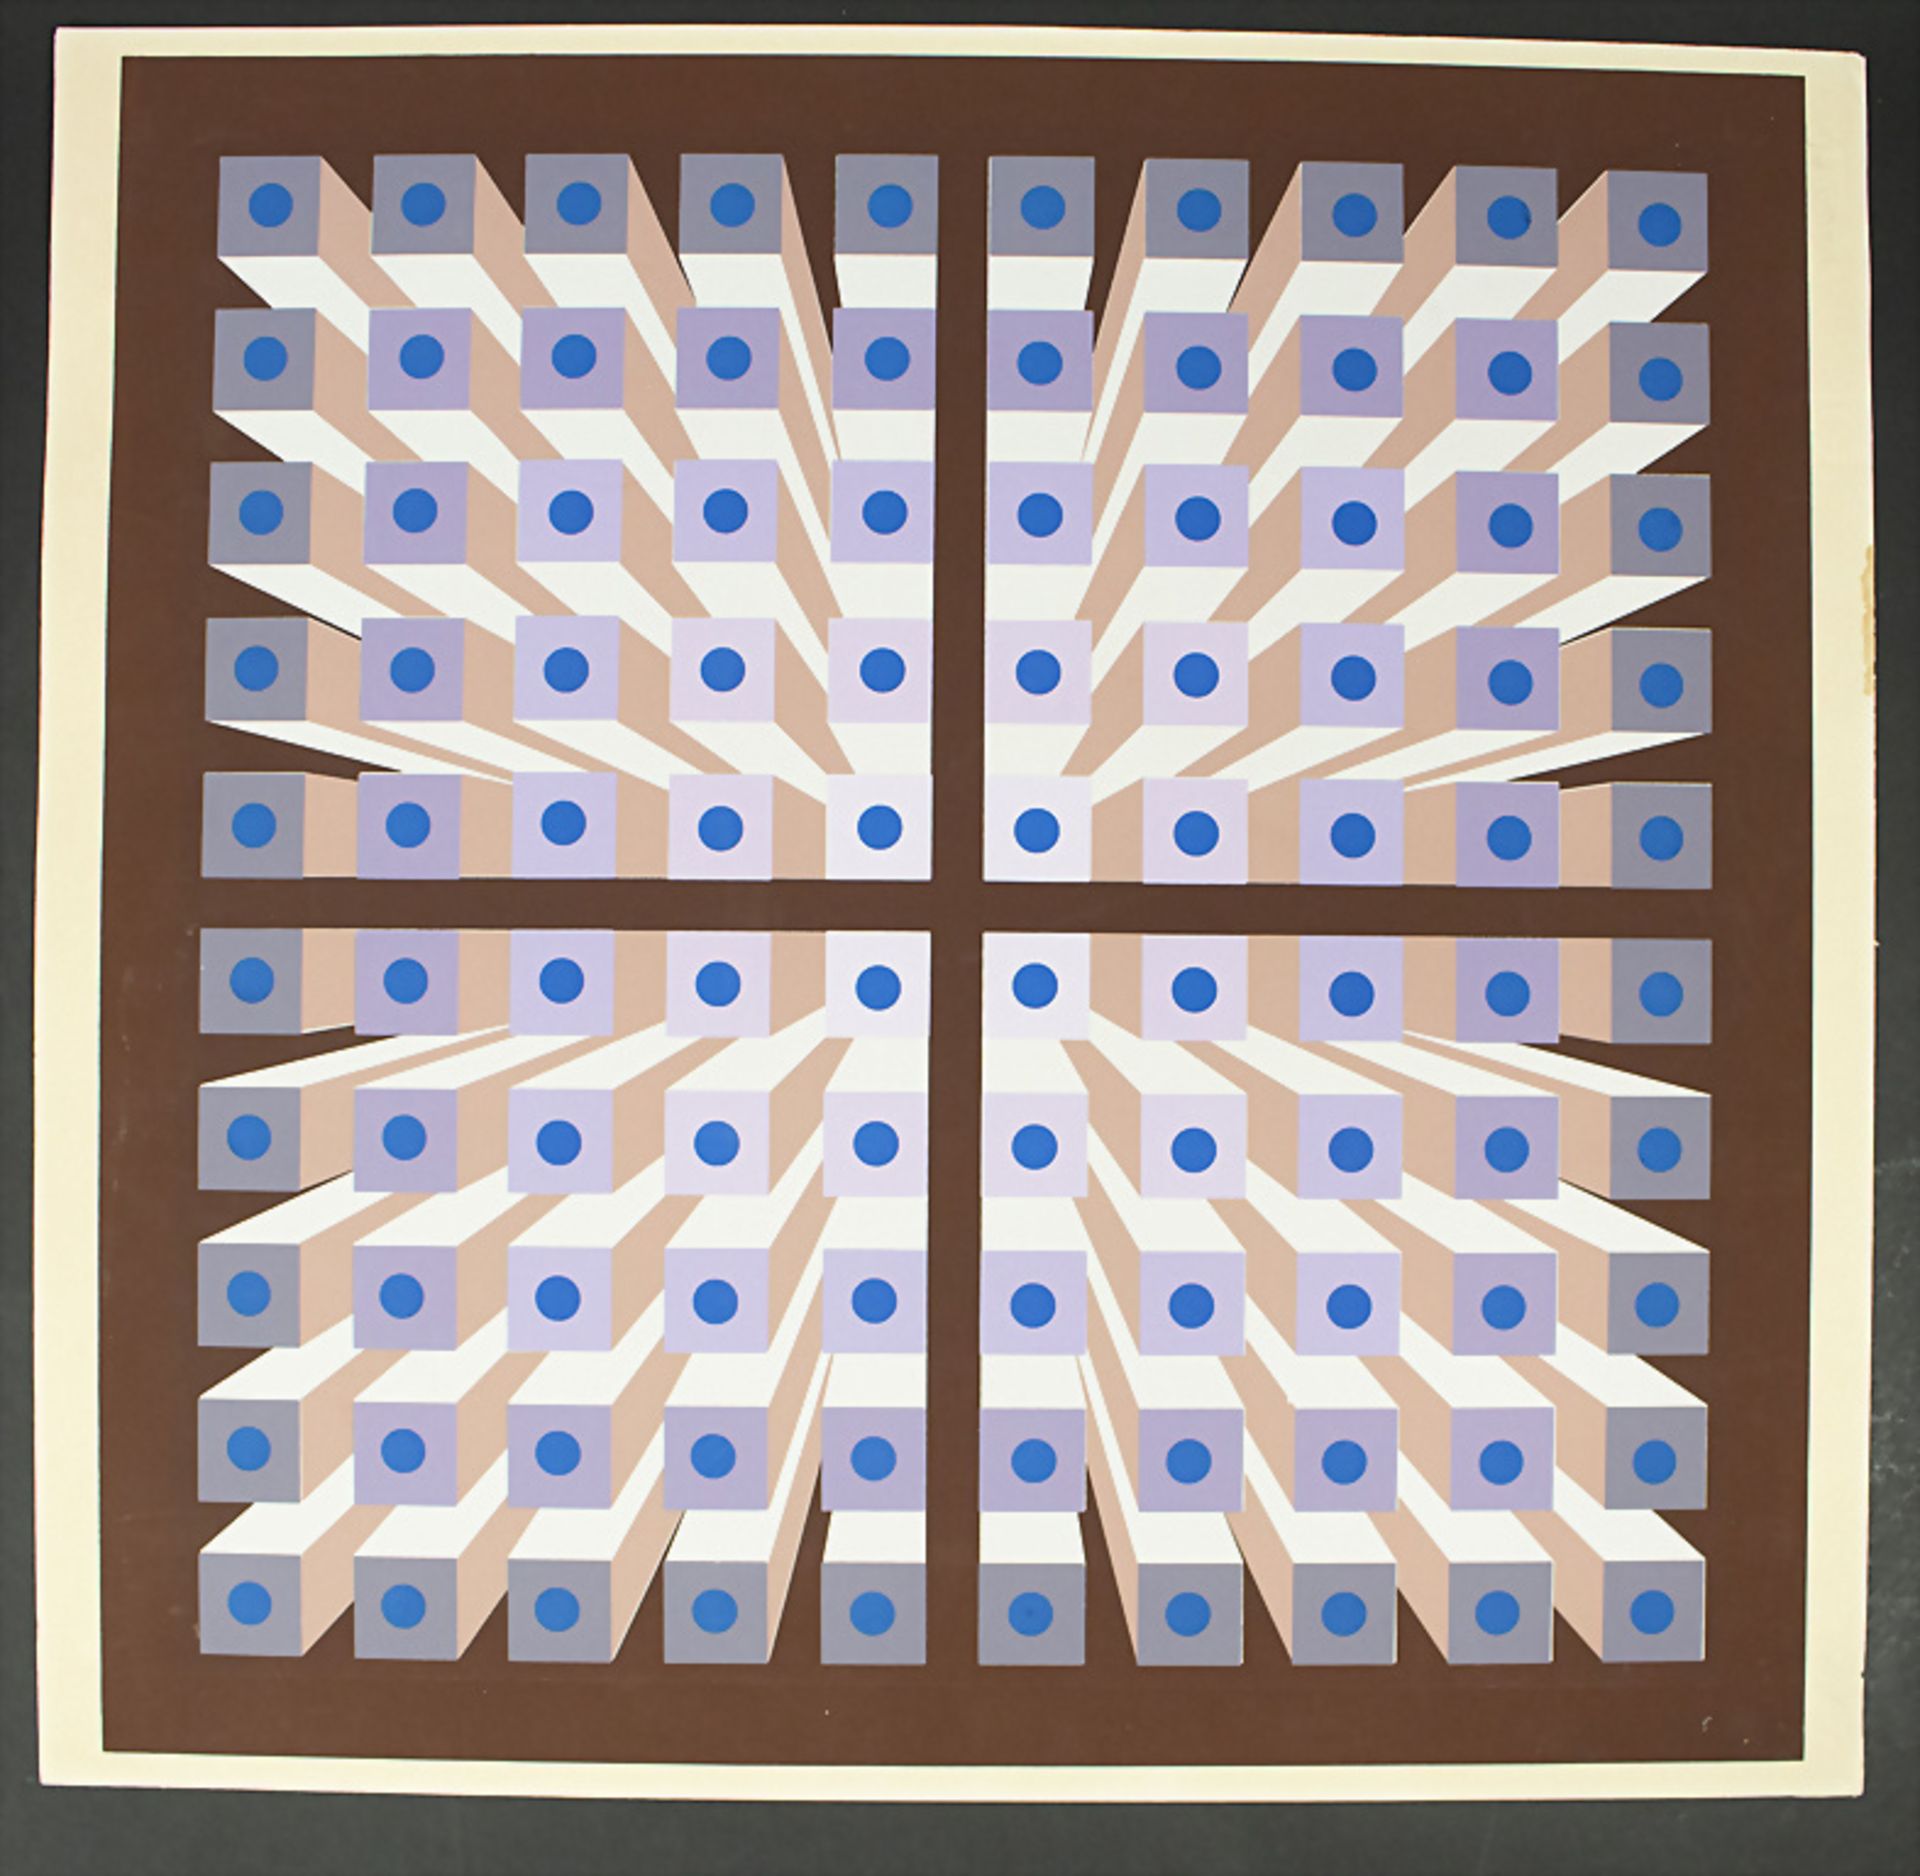 Victor VASARELY (1906-1997), 'Kompsition' / 'Composition', 20. Jh.